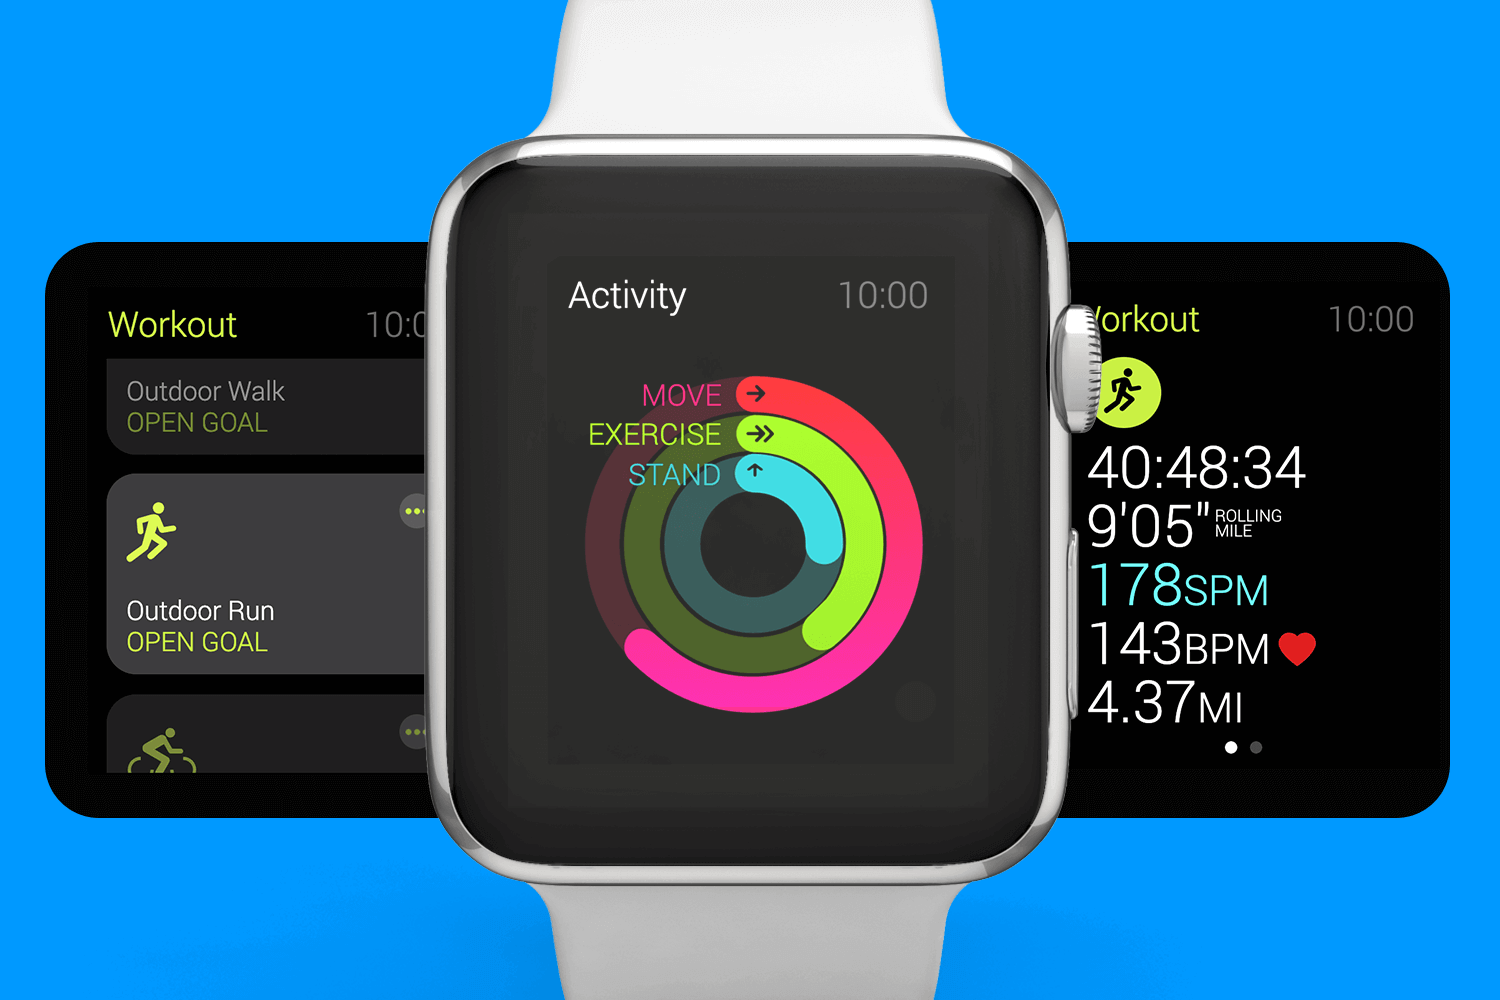 Apple Watch fitness app template displaying activity rings and workout stats